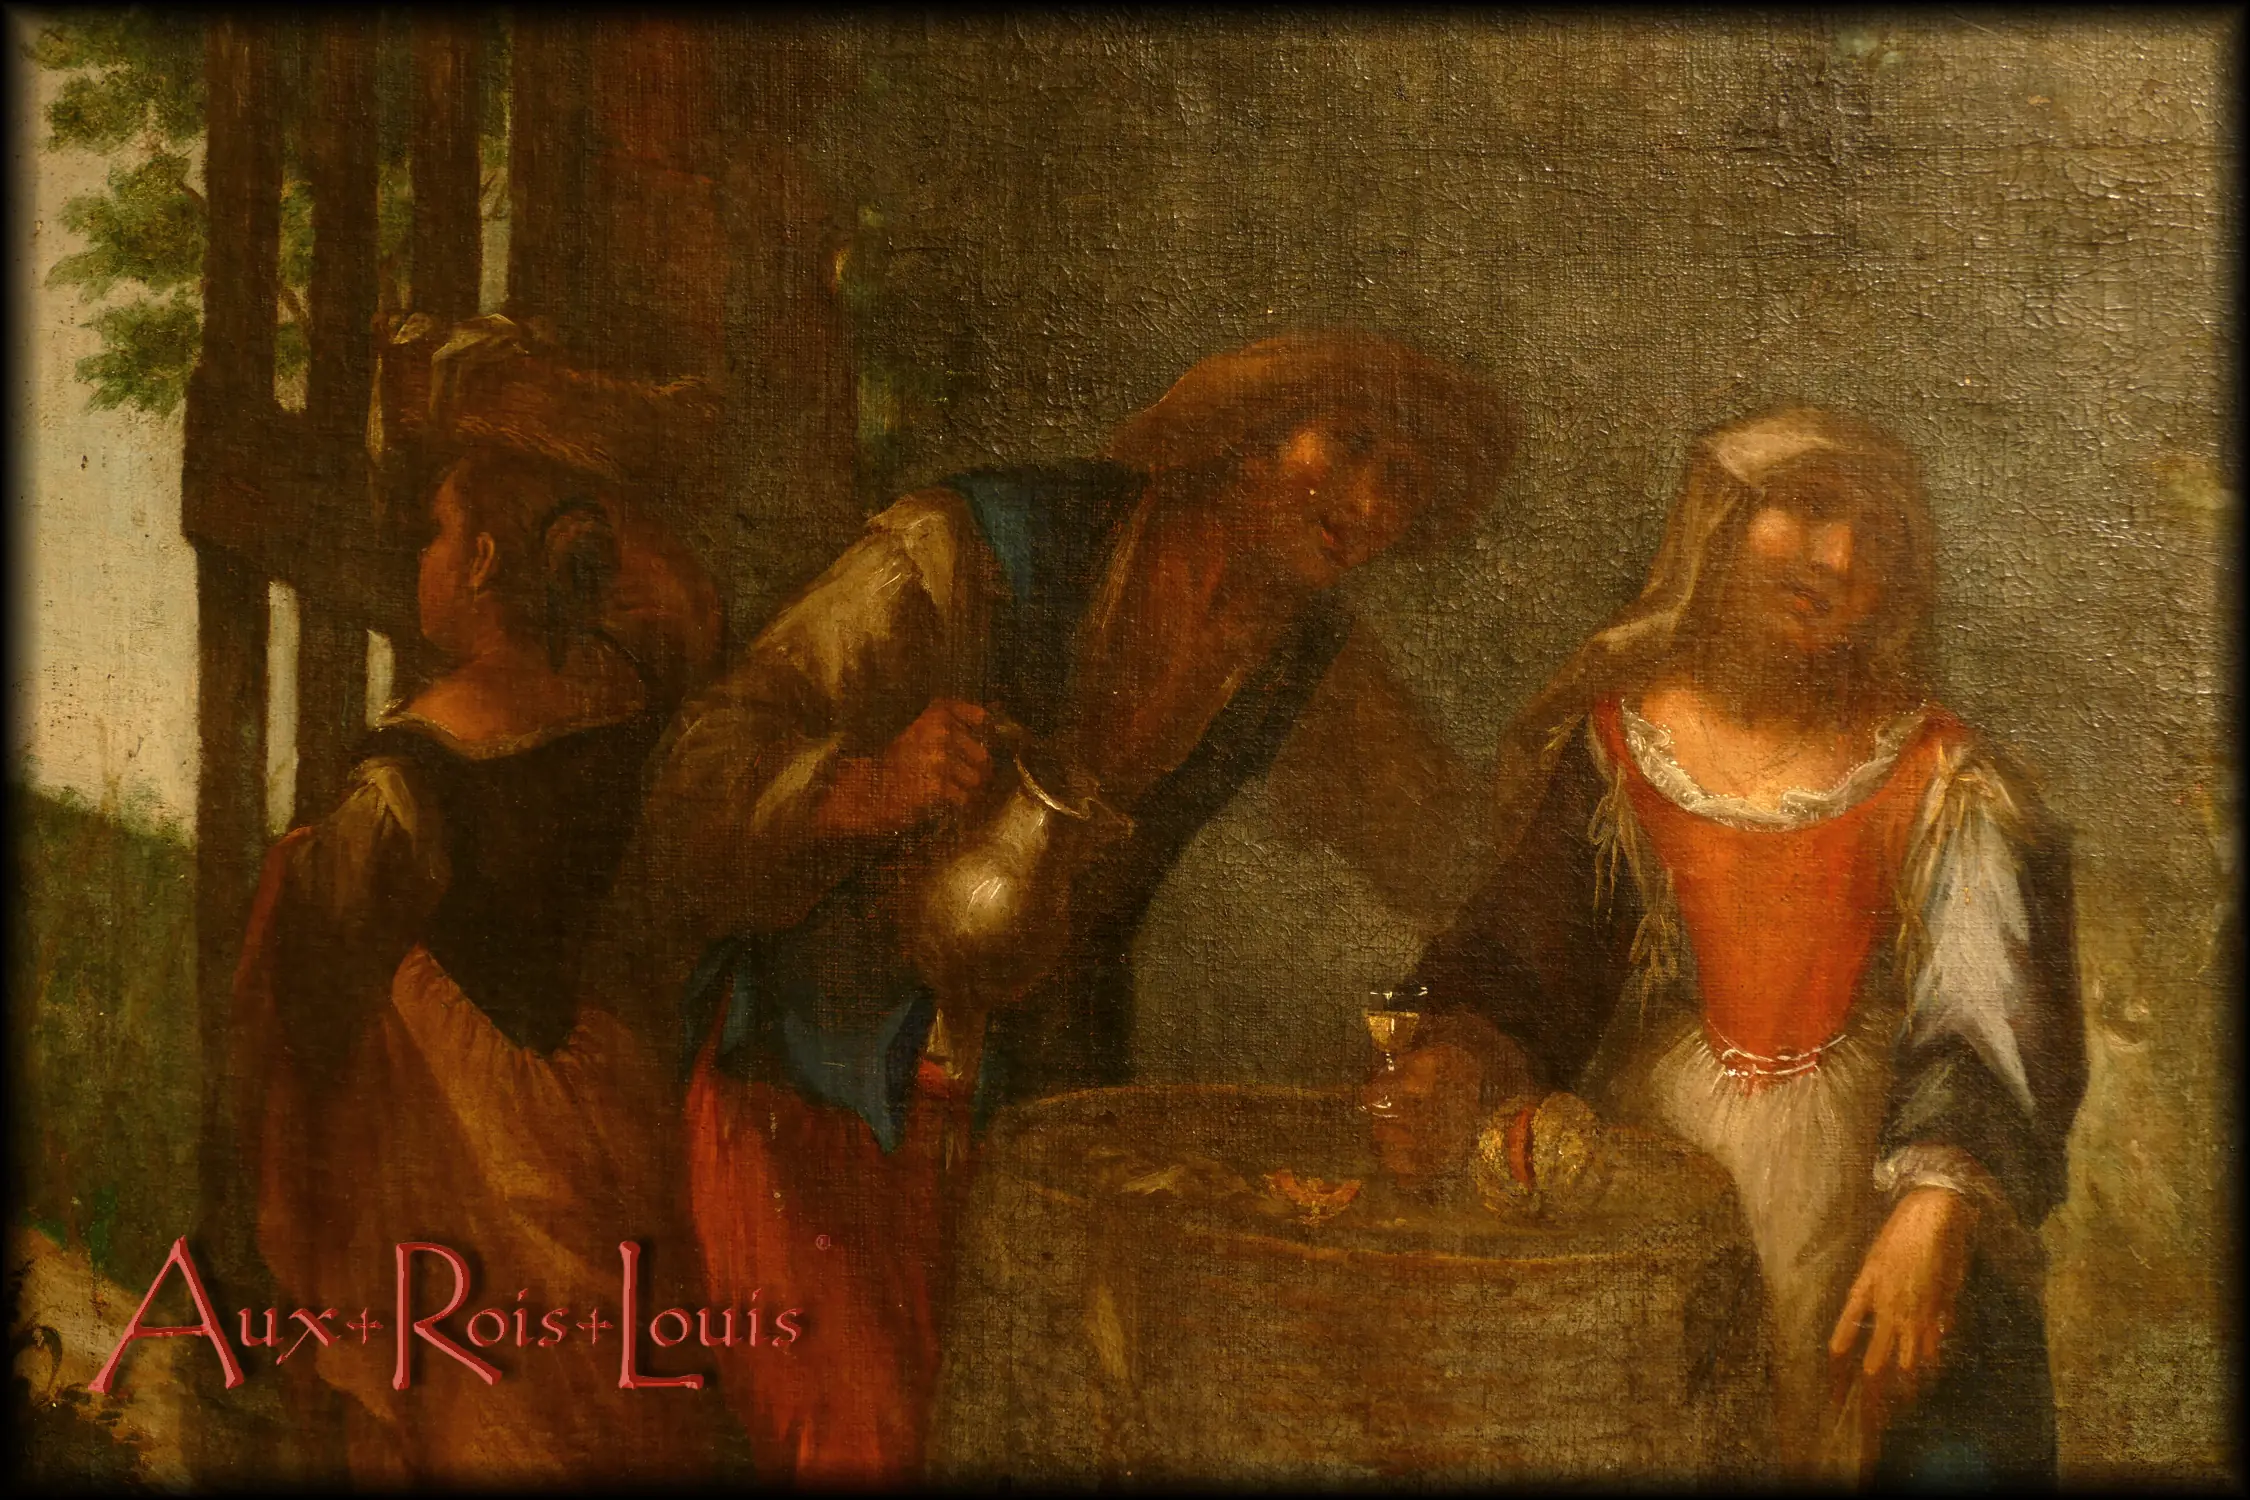 In the foreground, the bucolic scene centers around a seduction attempt, a figure of the famous Dance of Love. On an overturned barrel, hidden from view outside the Domain, a suitor offers a snack - slices of melon and a glass of white wine - to a lady who seems to politely turn away. But who is the other woman, proudly carrying a basket of laundry on her head, who quietly slips away as not to disturb?